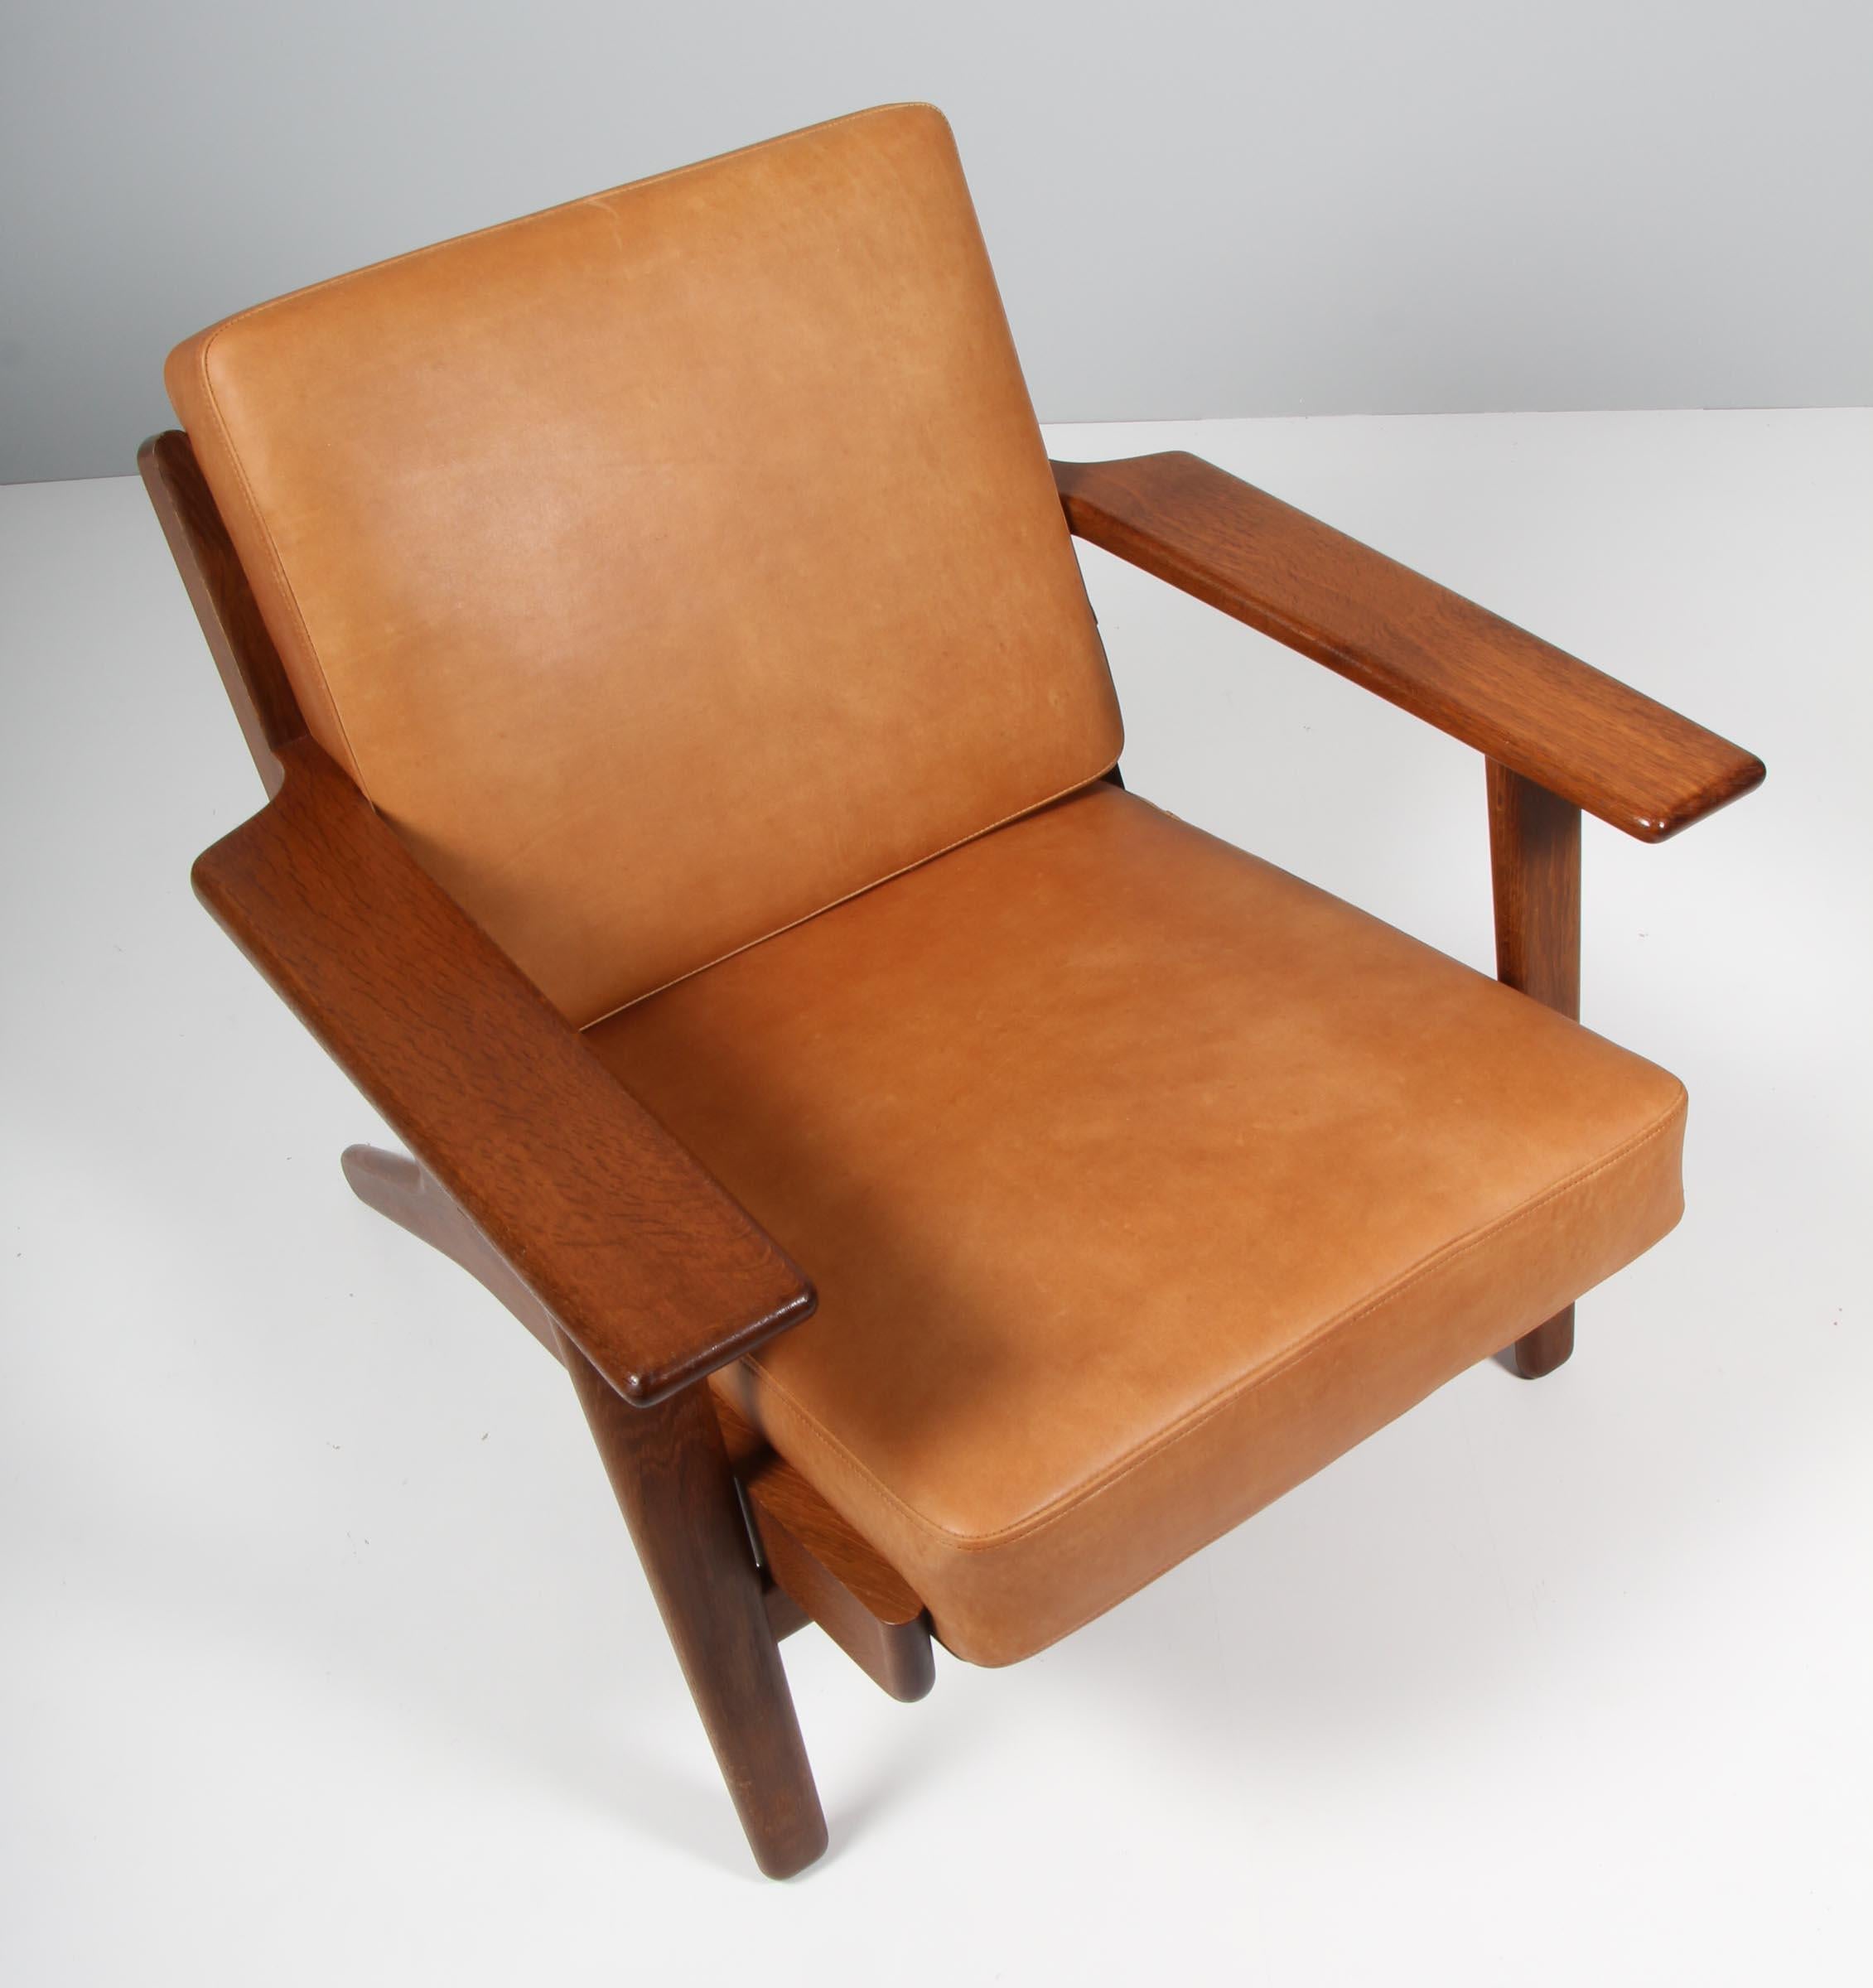 Hans J. Wegner lounge chair made of solid smoked oak.

New upholstered with vintage tan aniline leather.

Model 290, made by GETAMA.

 